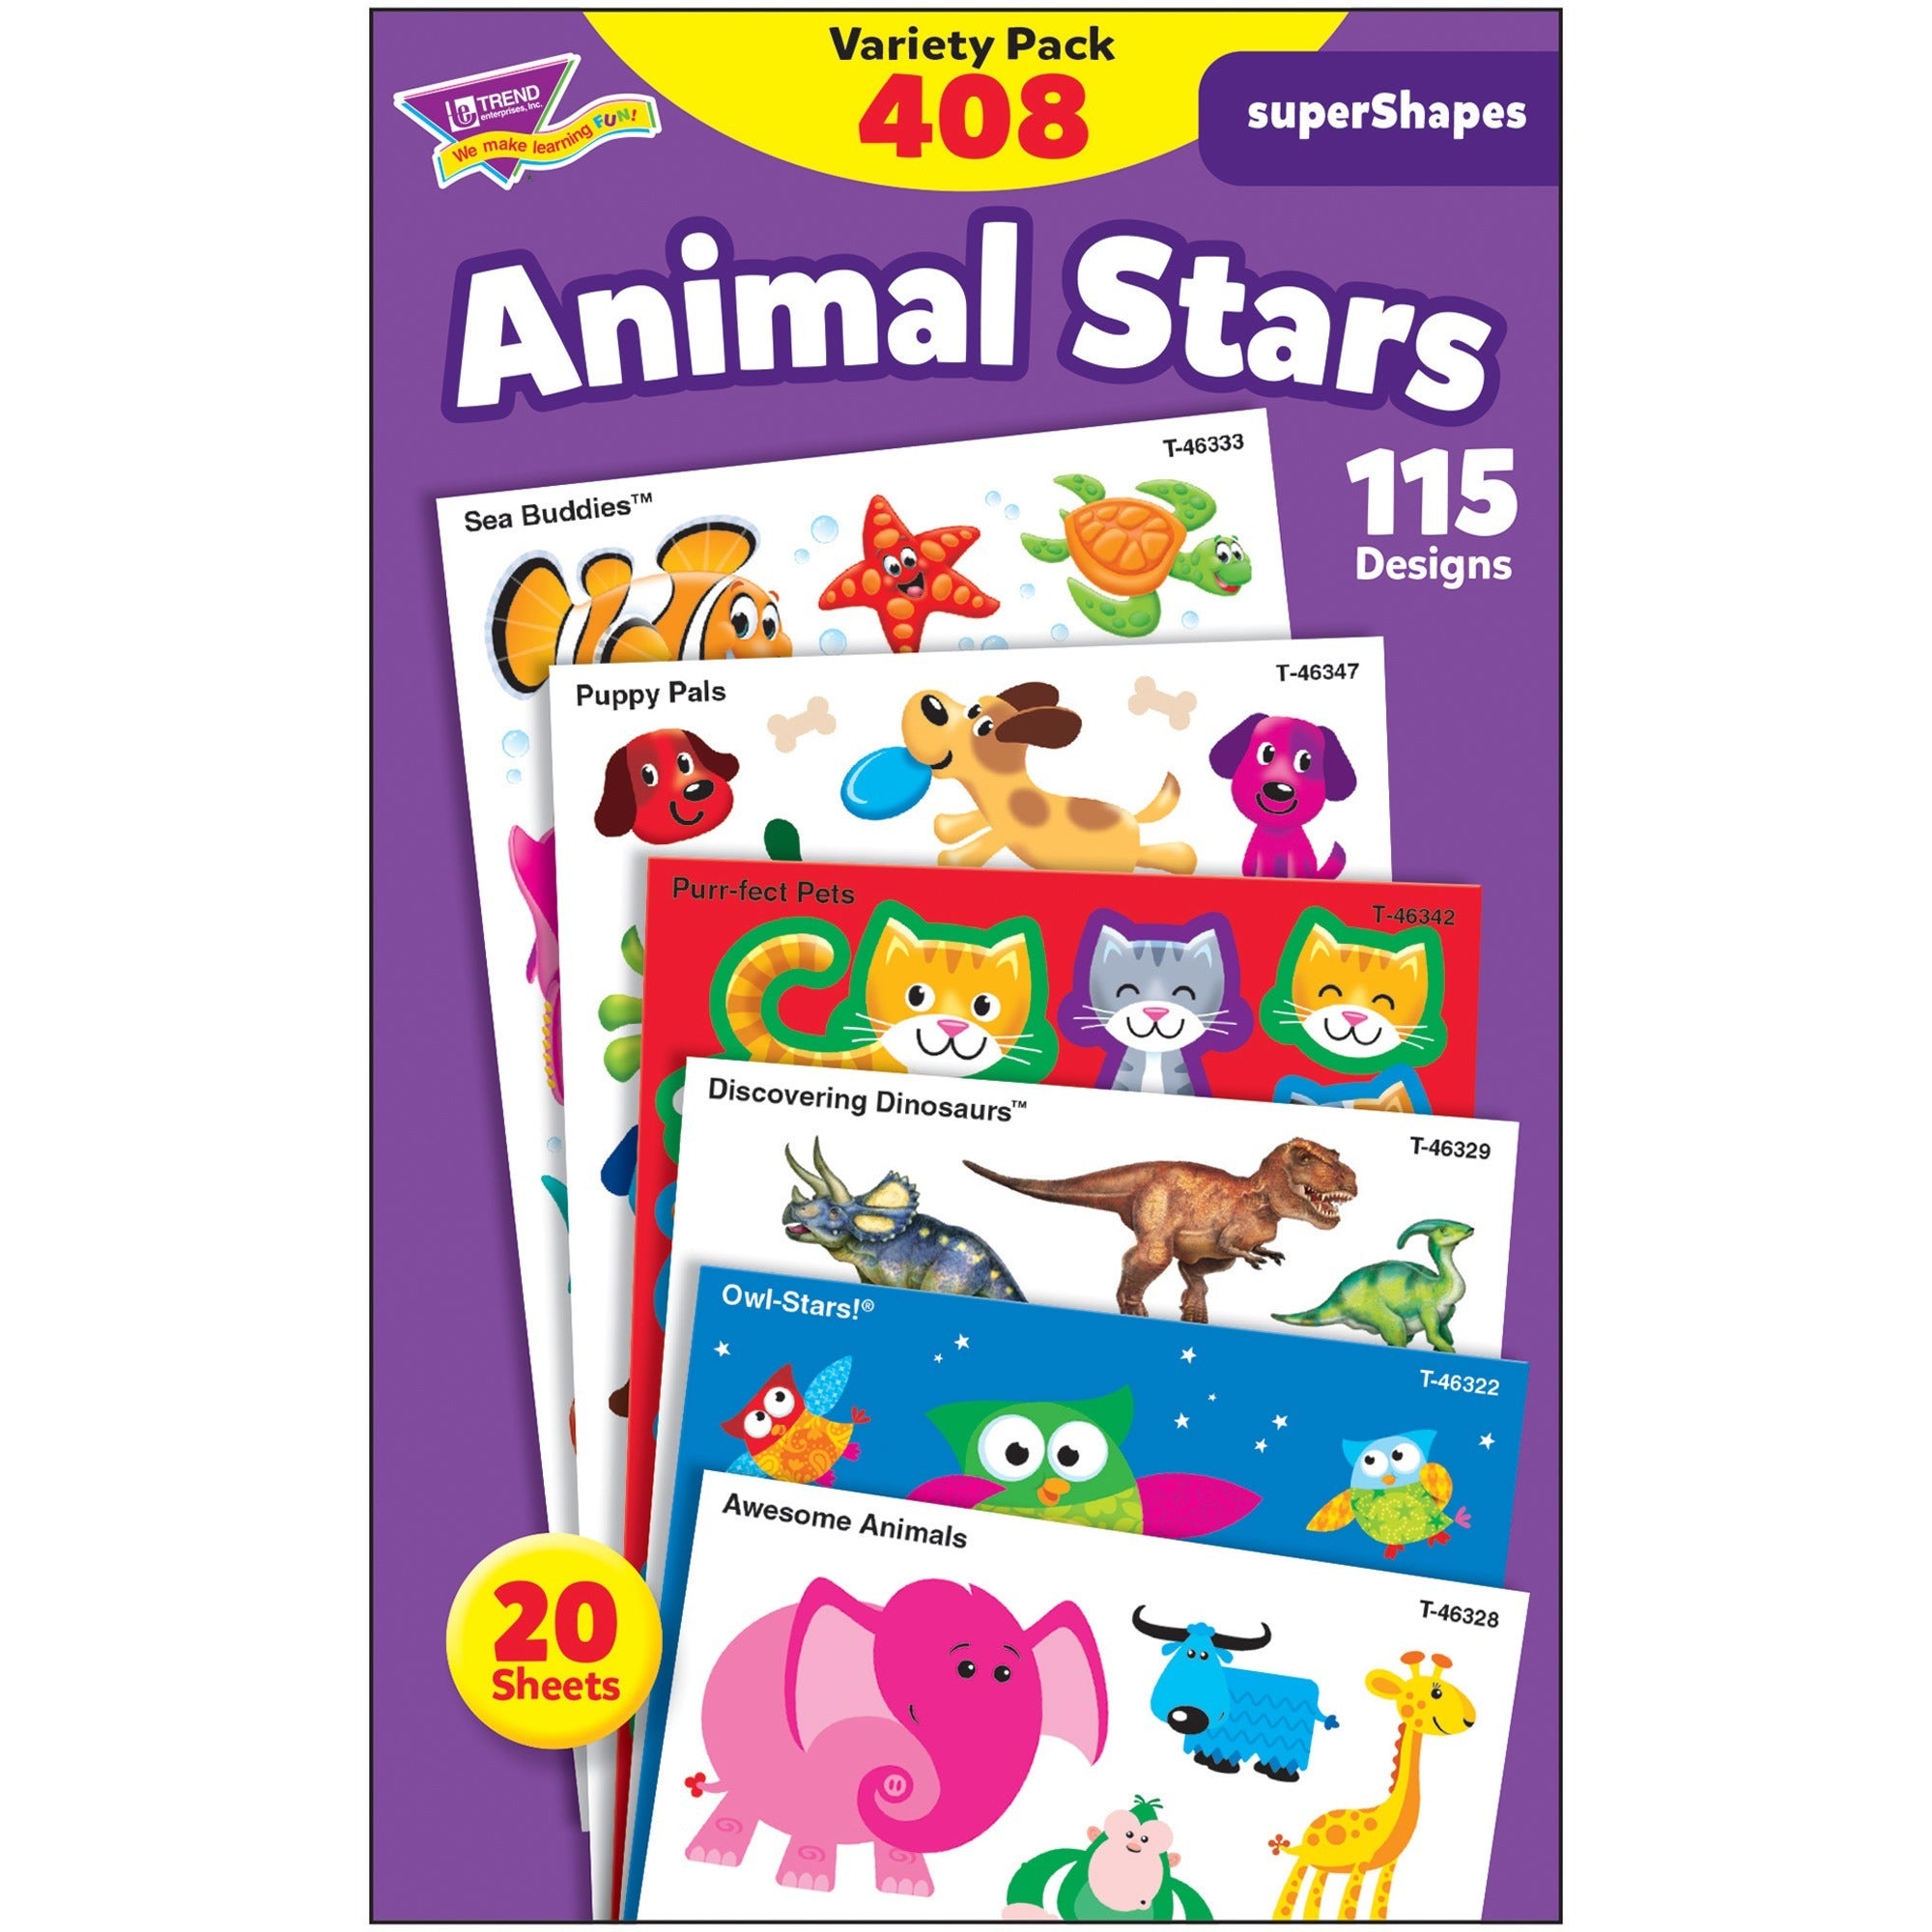 trend-animal-fun-stickers-variety-pack-fun-animal-theme-subject-sea-buddies-owl-stars-puppy-pals-shape-photo-safe-non-toxic-acid-free-8-height-x-413-width-x-663-length-multicolor-408-pack_tep46928 - 1